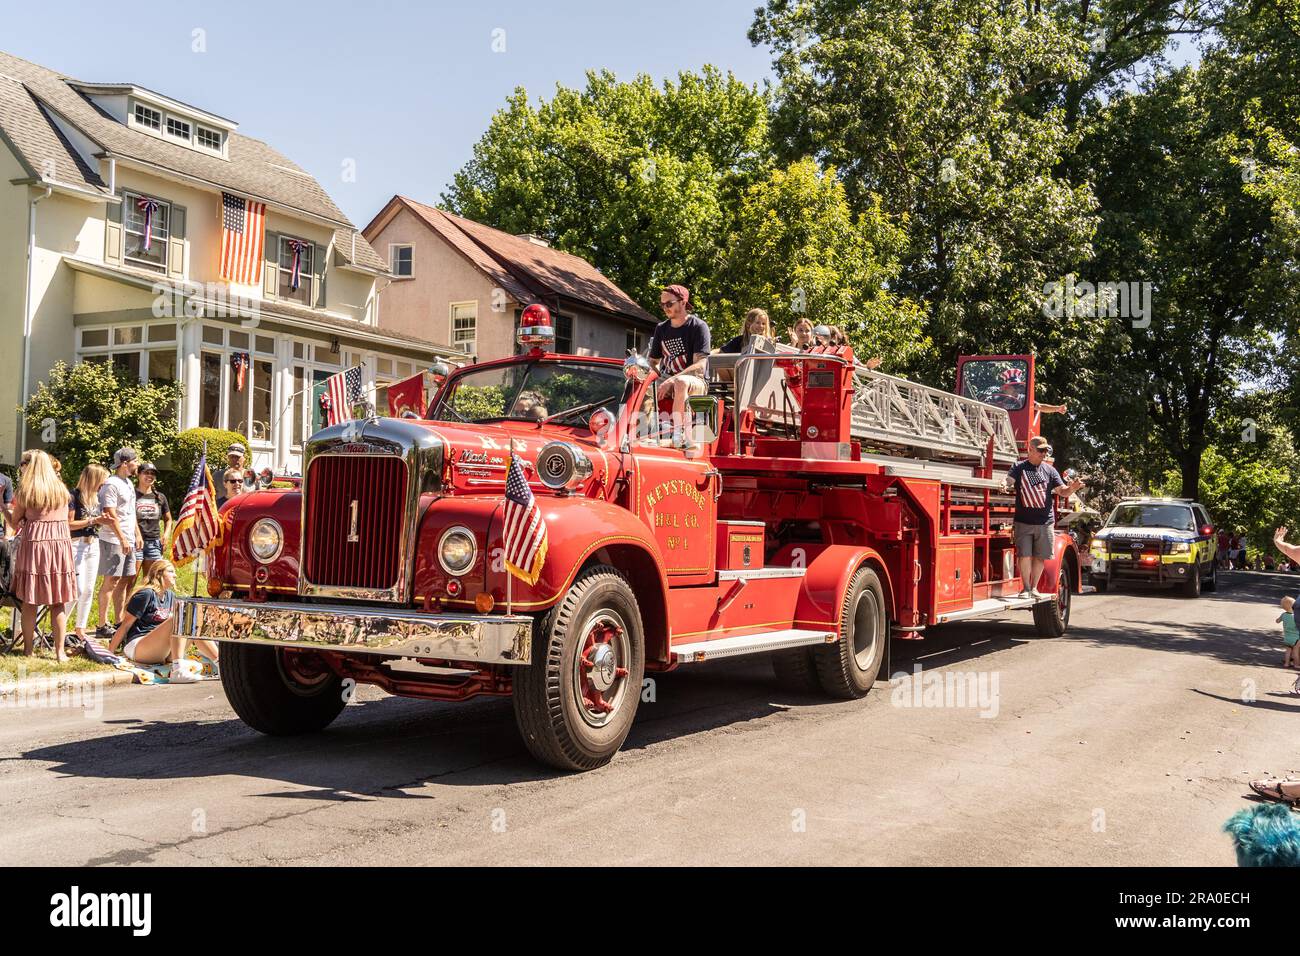 Wyomissing, Pennsylvania - July 4, 2022:  Vintage Fire engine in small town 4th of July parade Stock Photo